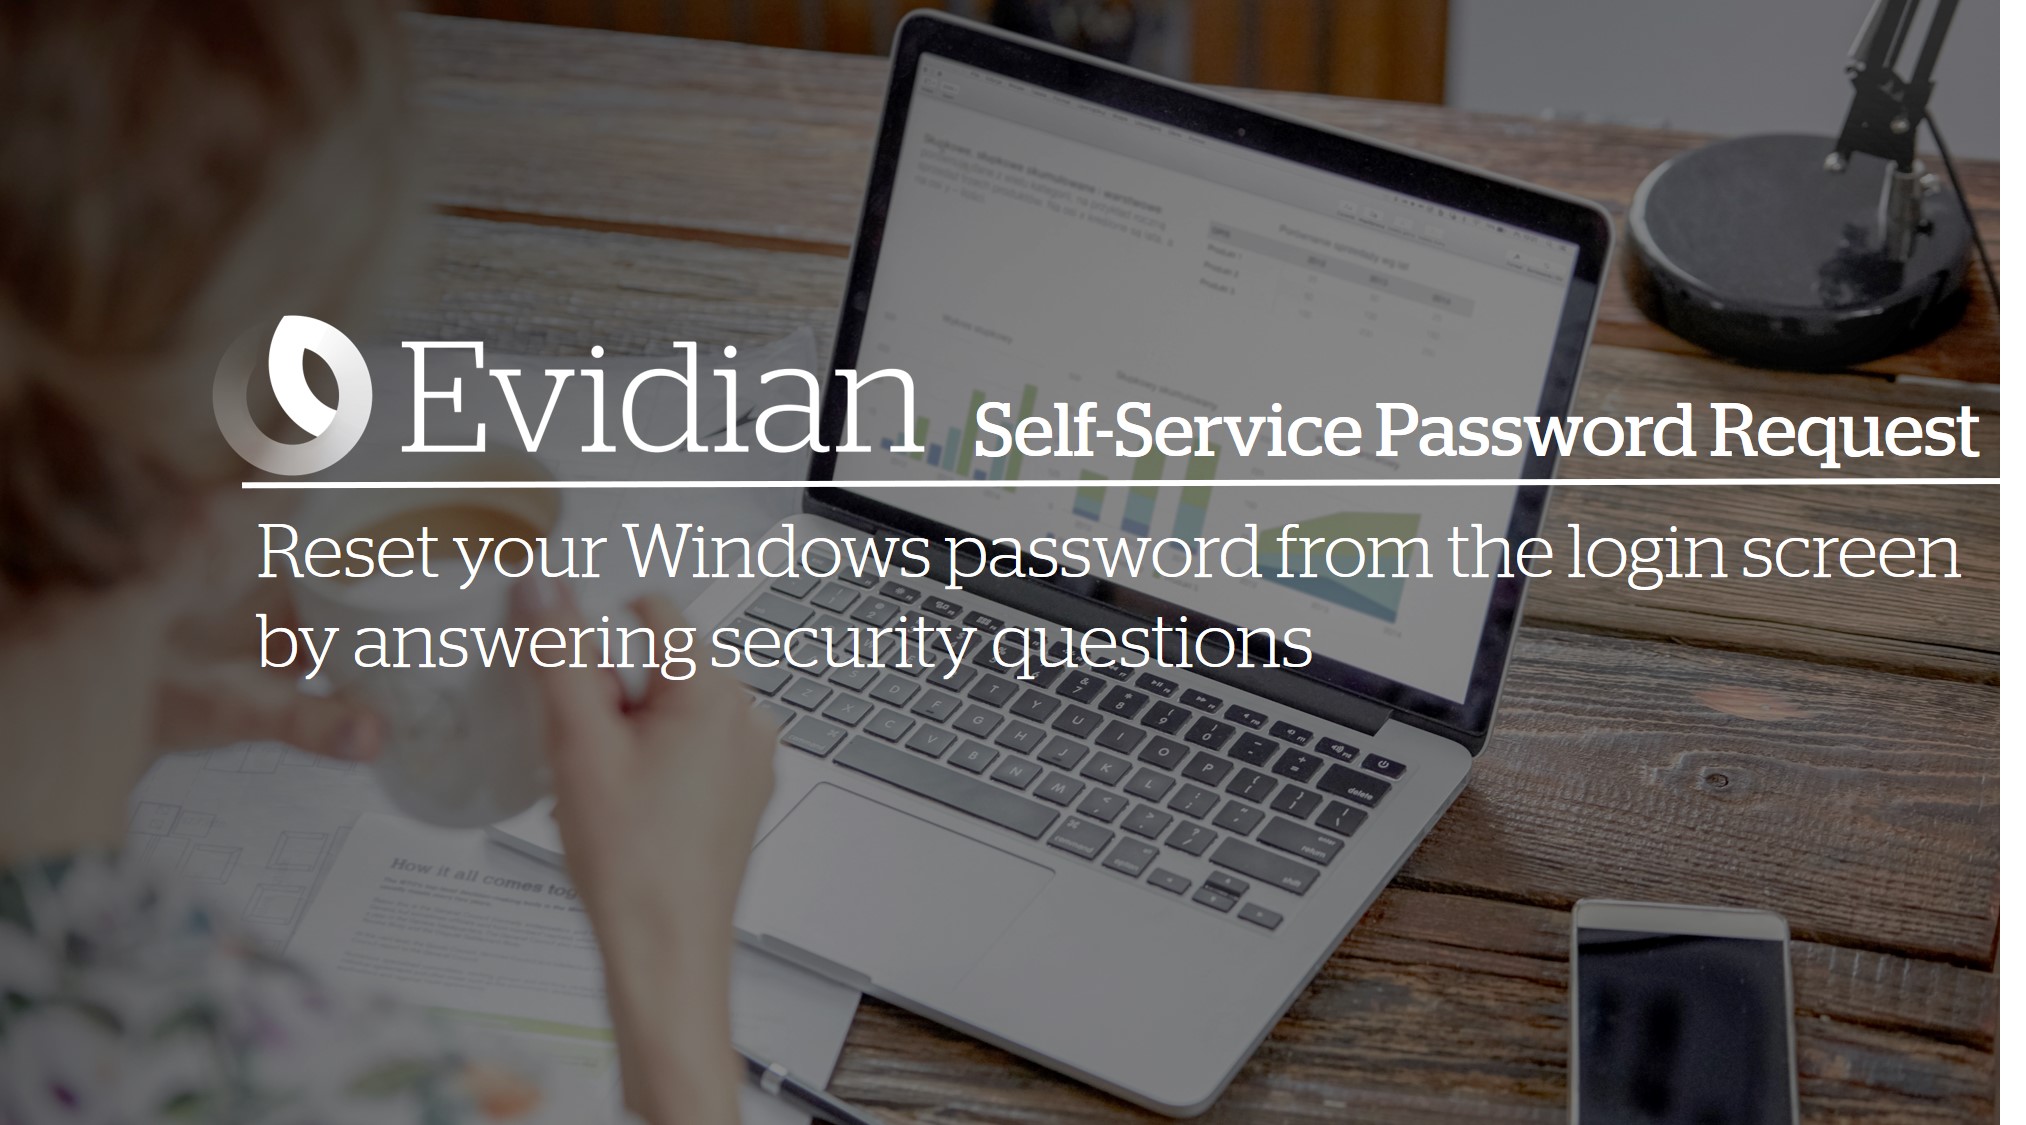 Answering to security questions for SSPR (Self-Service Password Reset)